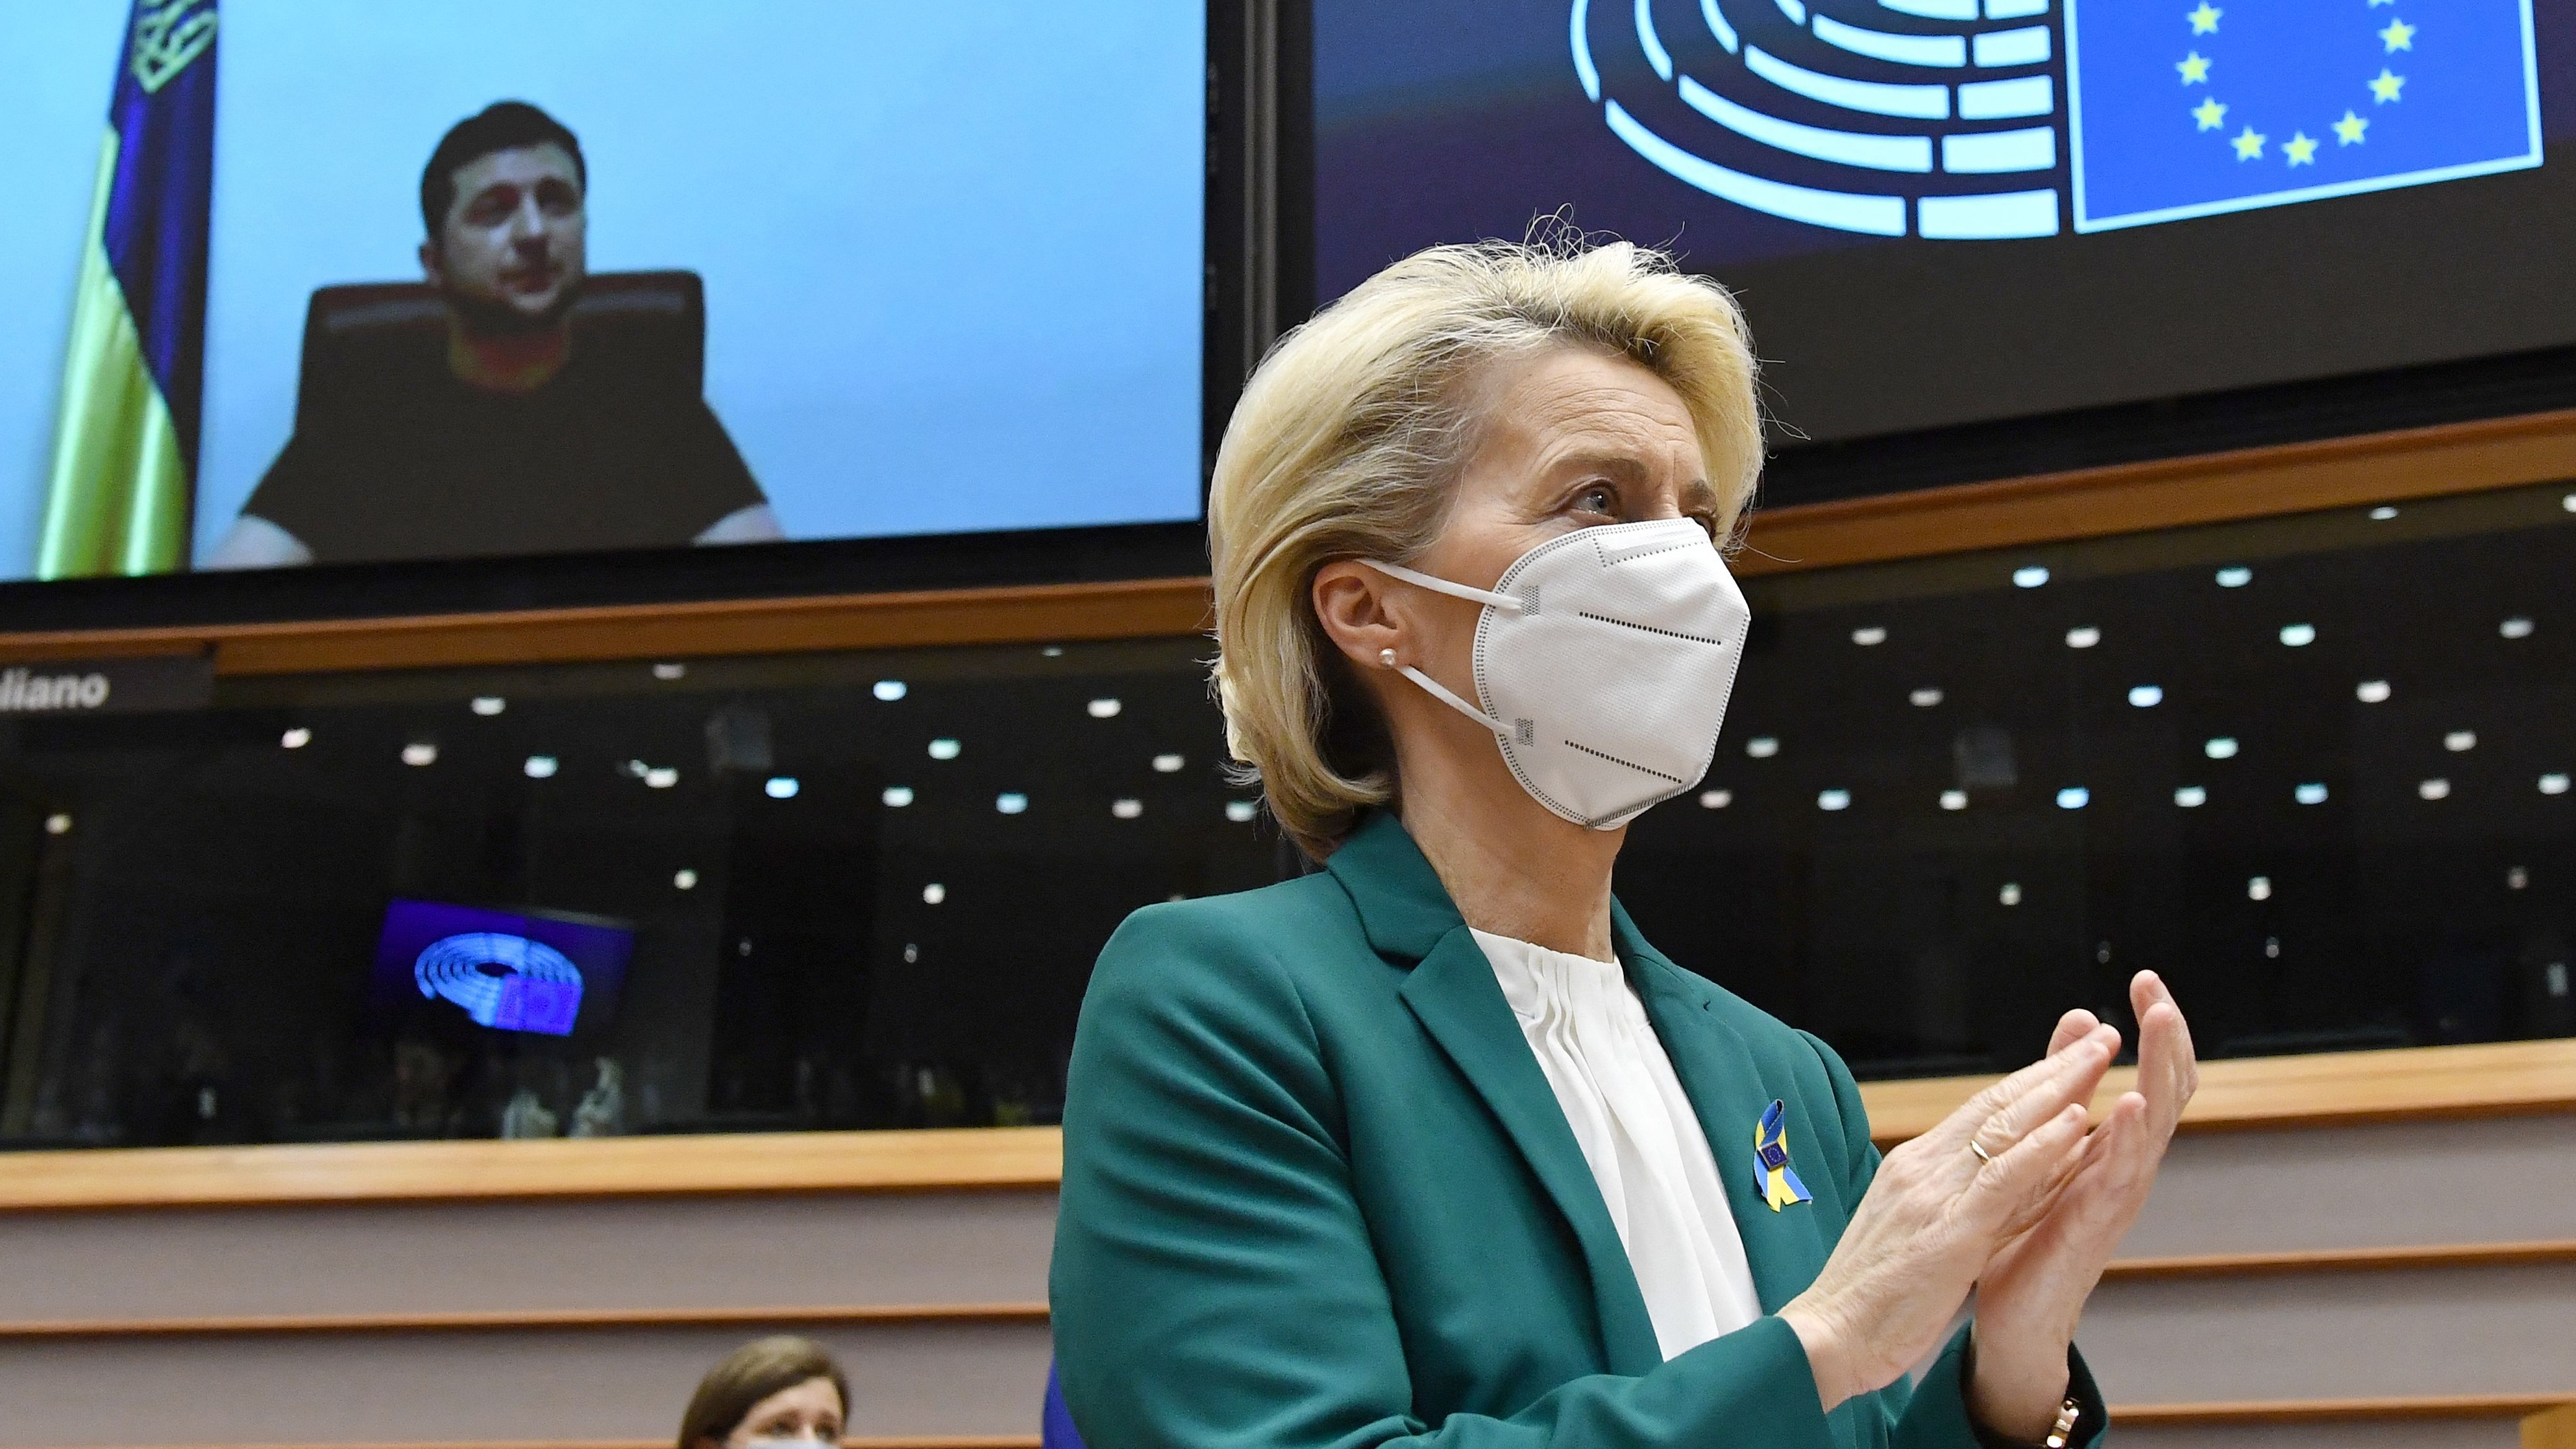 2 March: President of the European Commission Ursula von der Leyen rises to her feet during a standing ovation following an address by President Zelensky